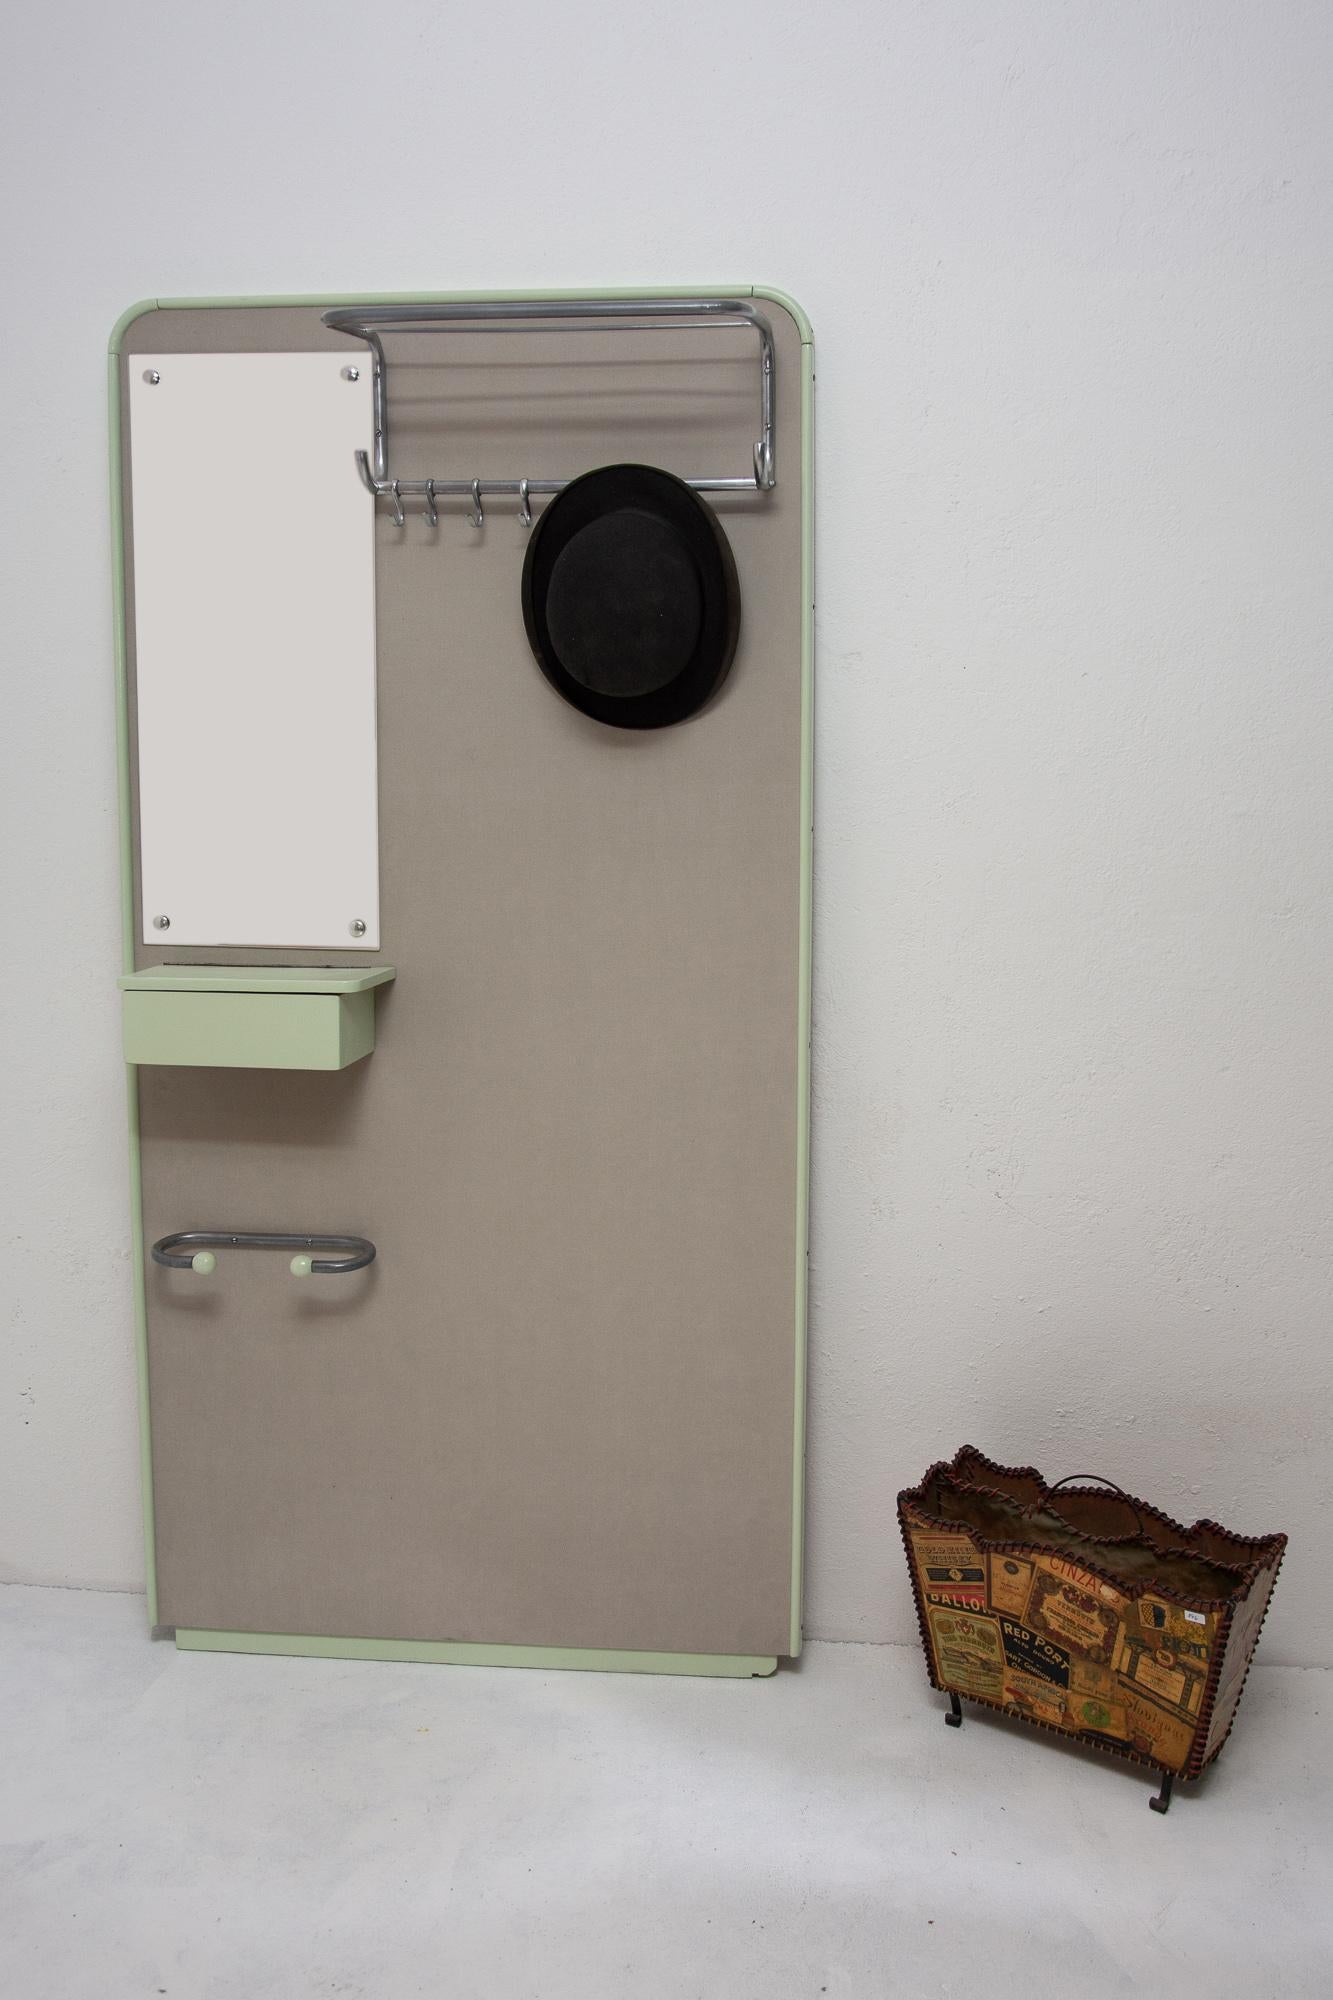 A beautiful example of Bohemian pre-war functionalism represents this model of entrance clothes stand with mirror. It was made in the 1930s by Mucke-Melder company. The rack features a chromed holder for hats, a new mirror and an umbrella